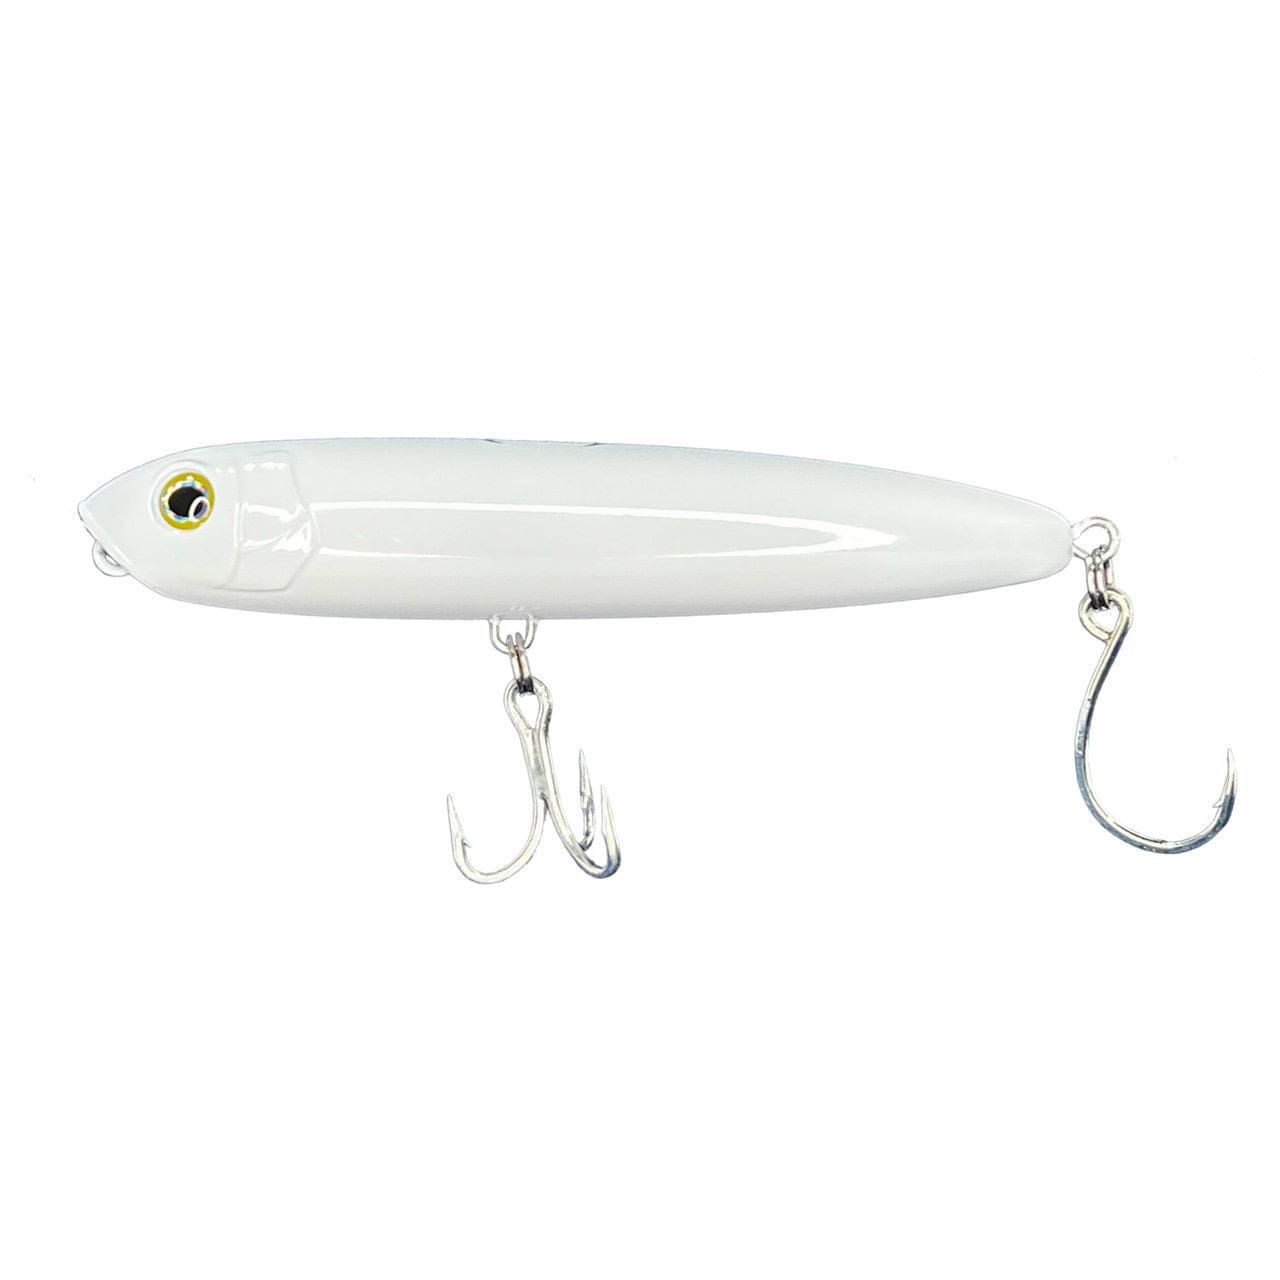 Owner Offset Shank Wide Gap Worm Hooks - The Saltwater Edge